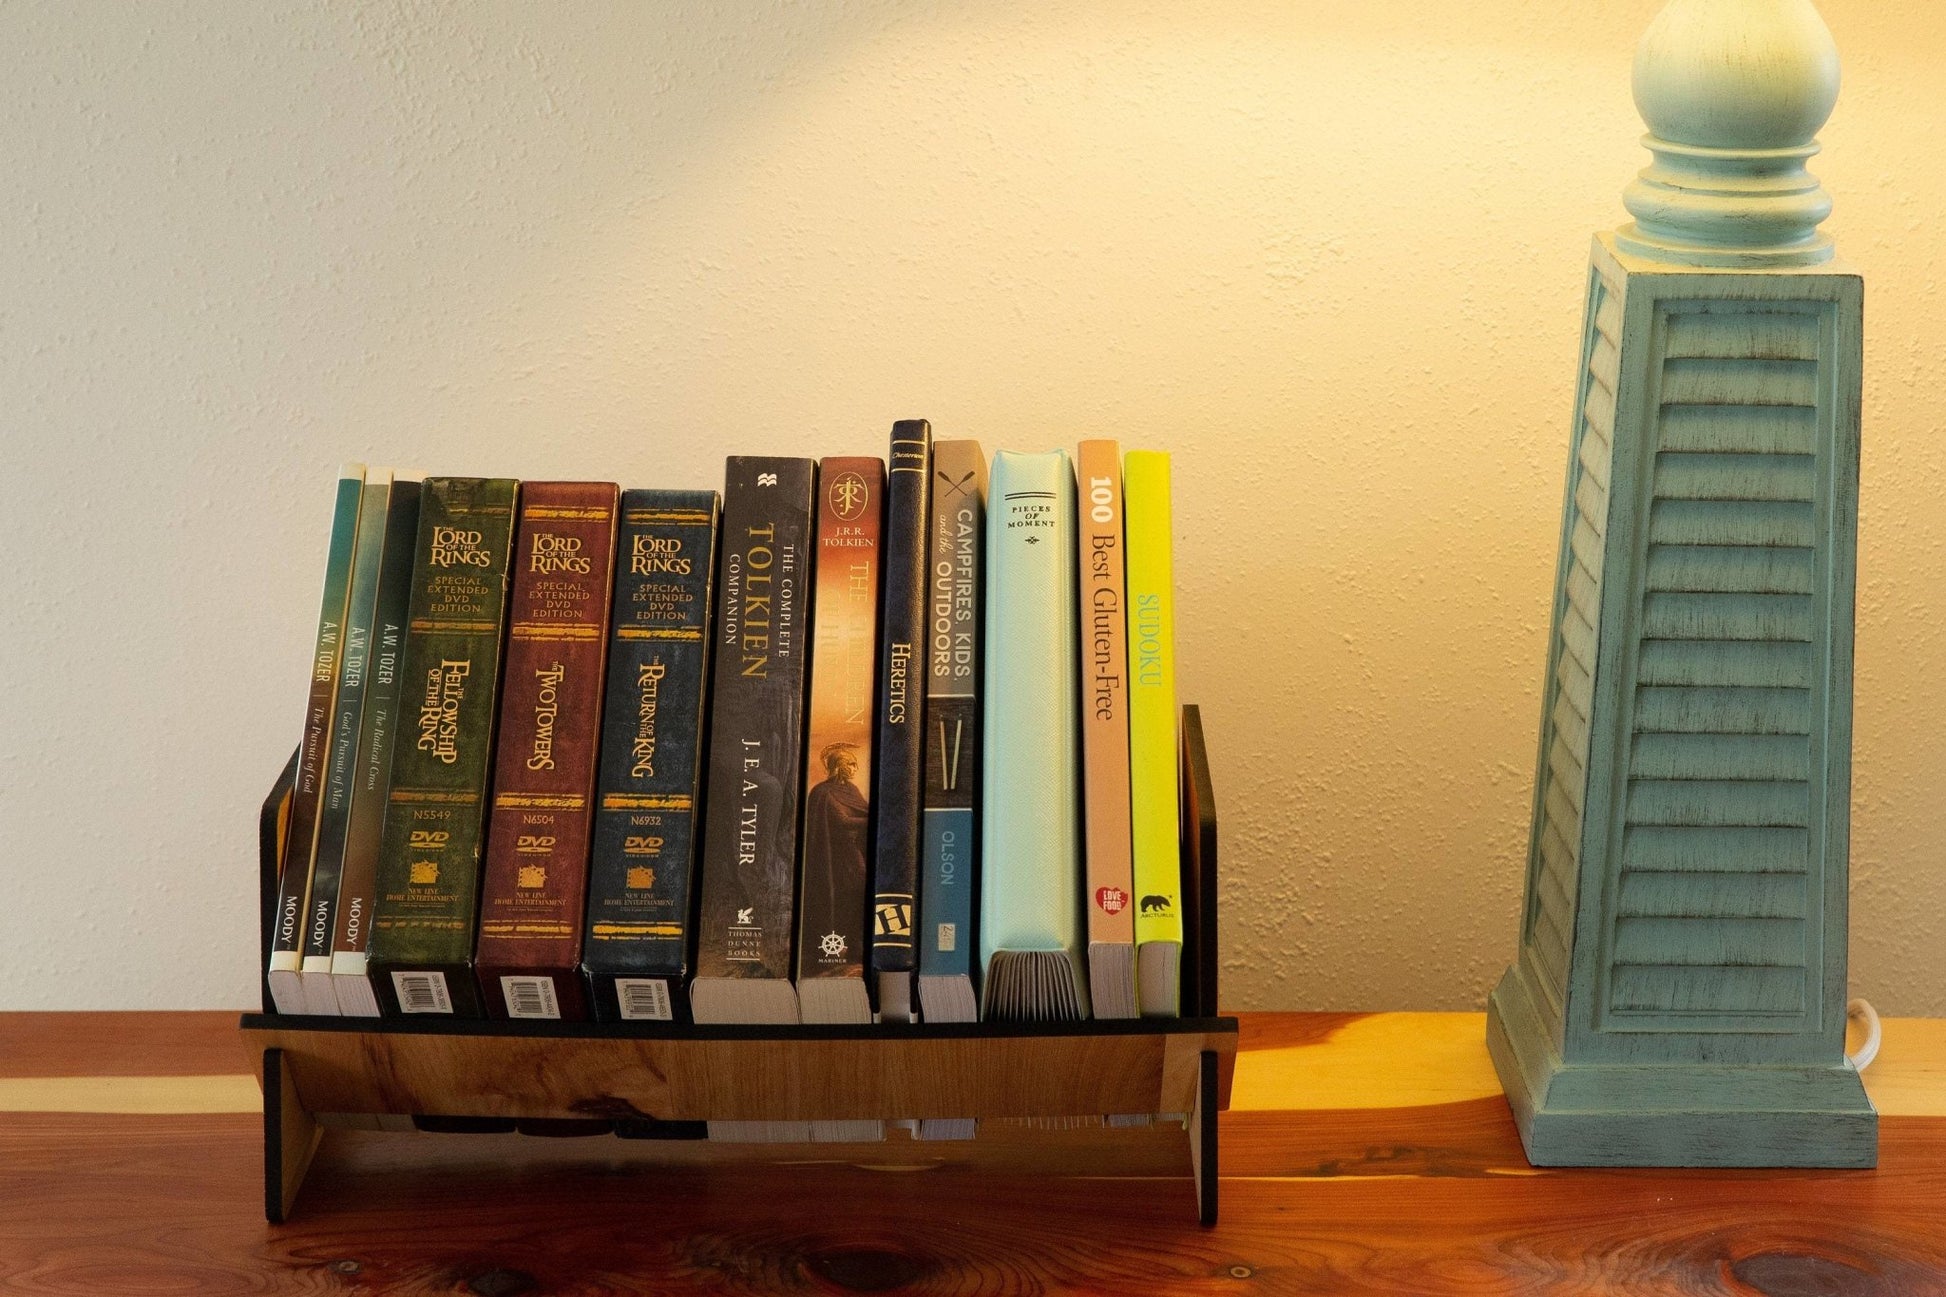 Tabletop Bookshelf - Happy's Gifts and Apparel